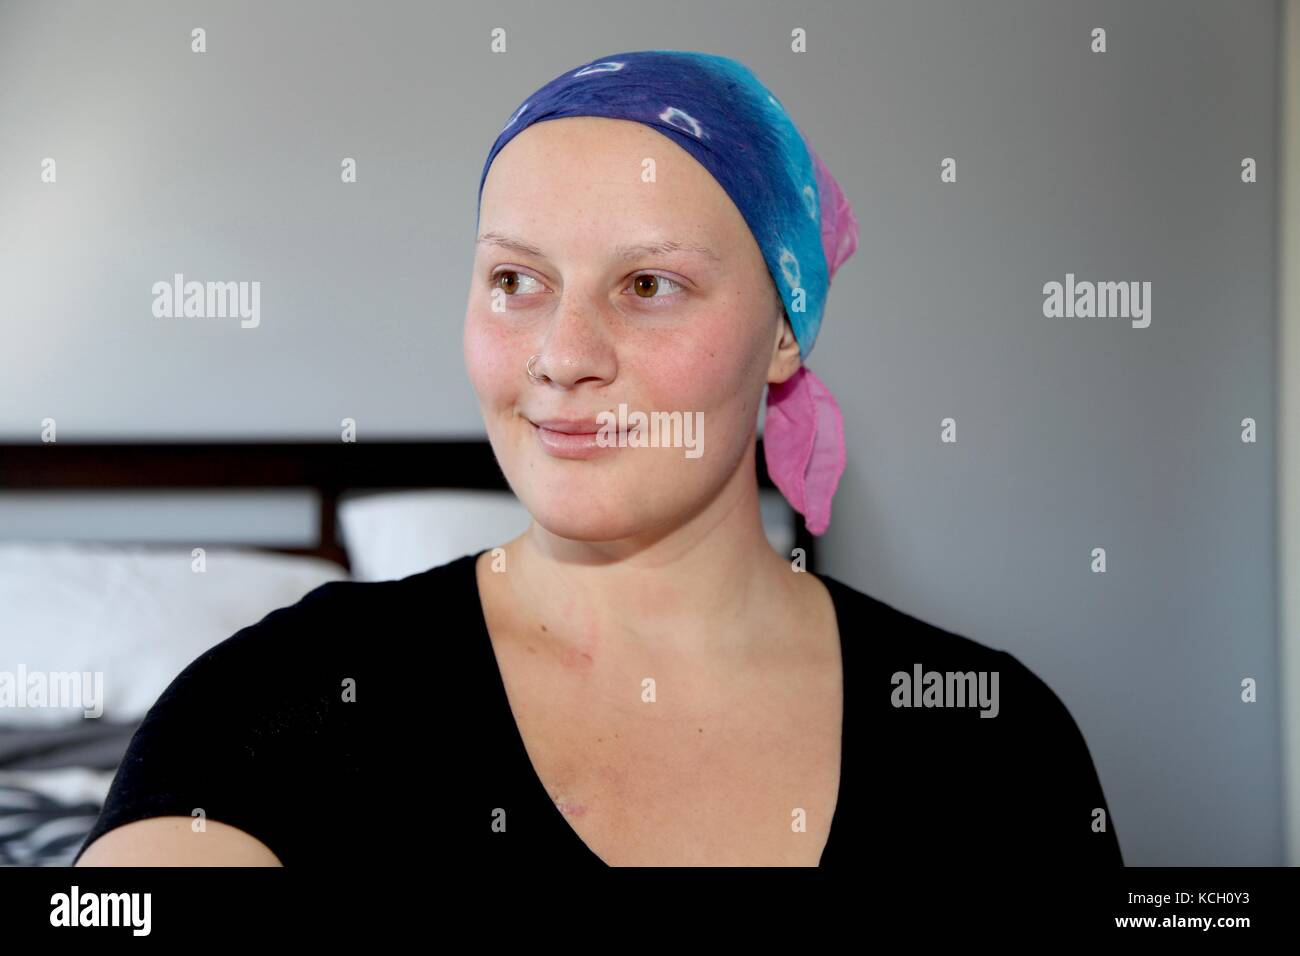 Young cancer patient in a headscarf Stock Photo